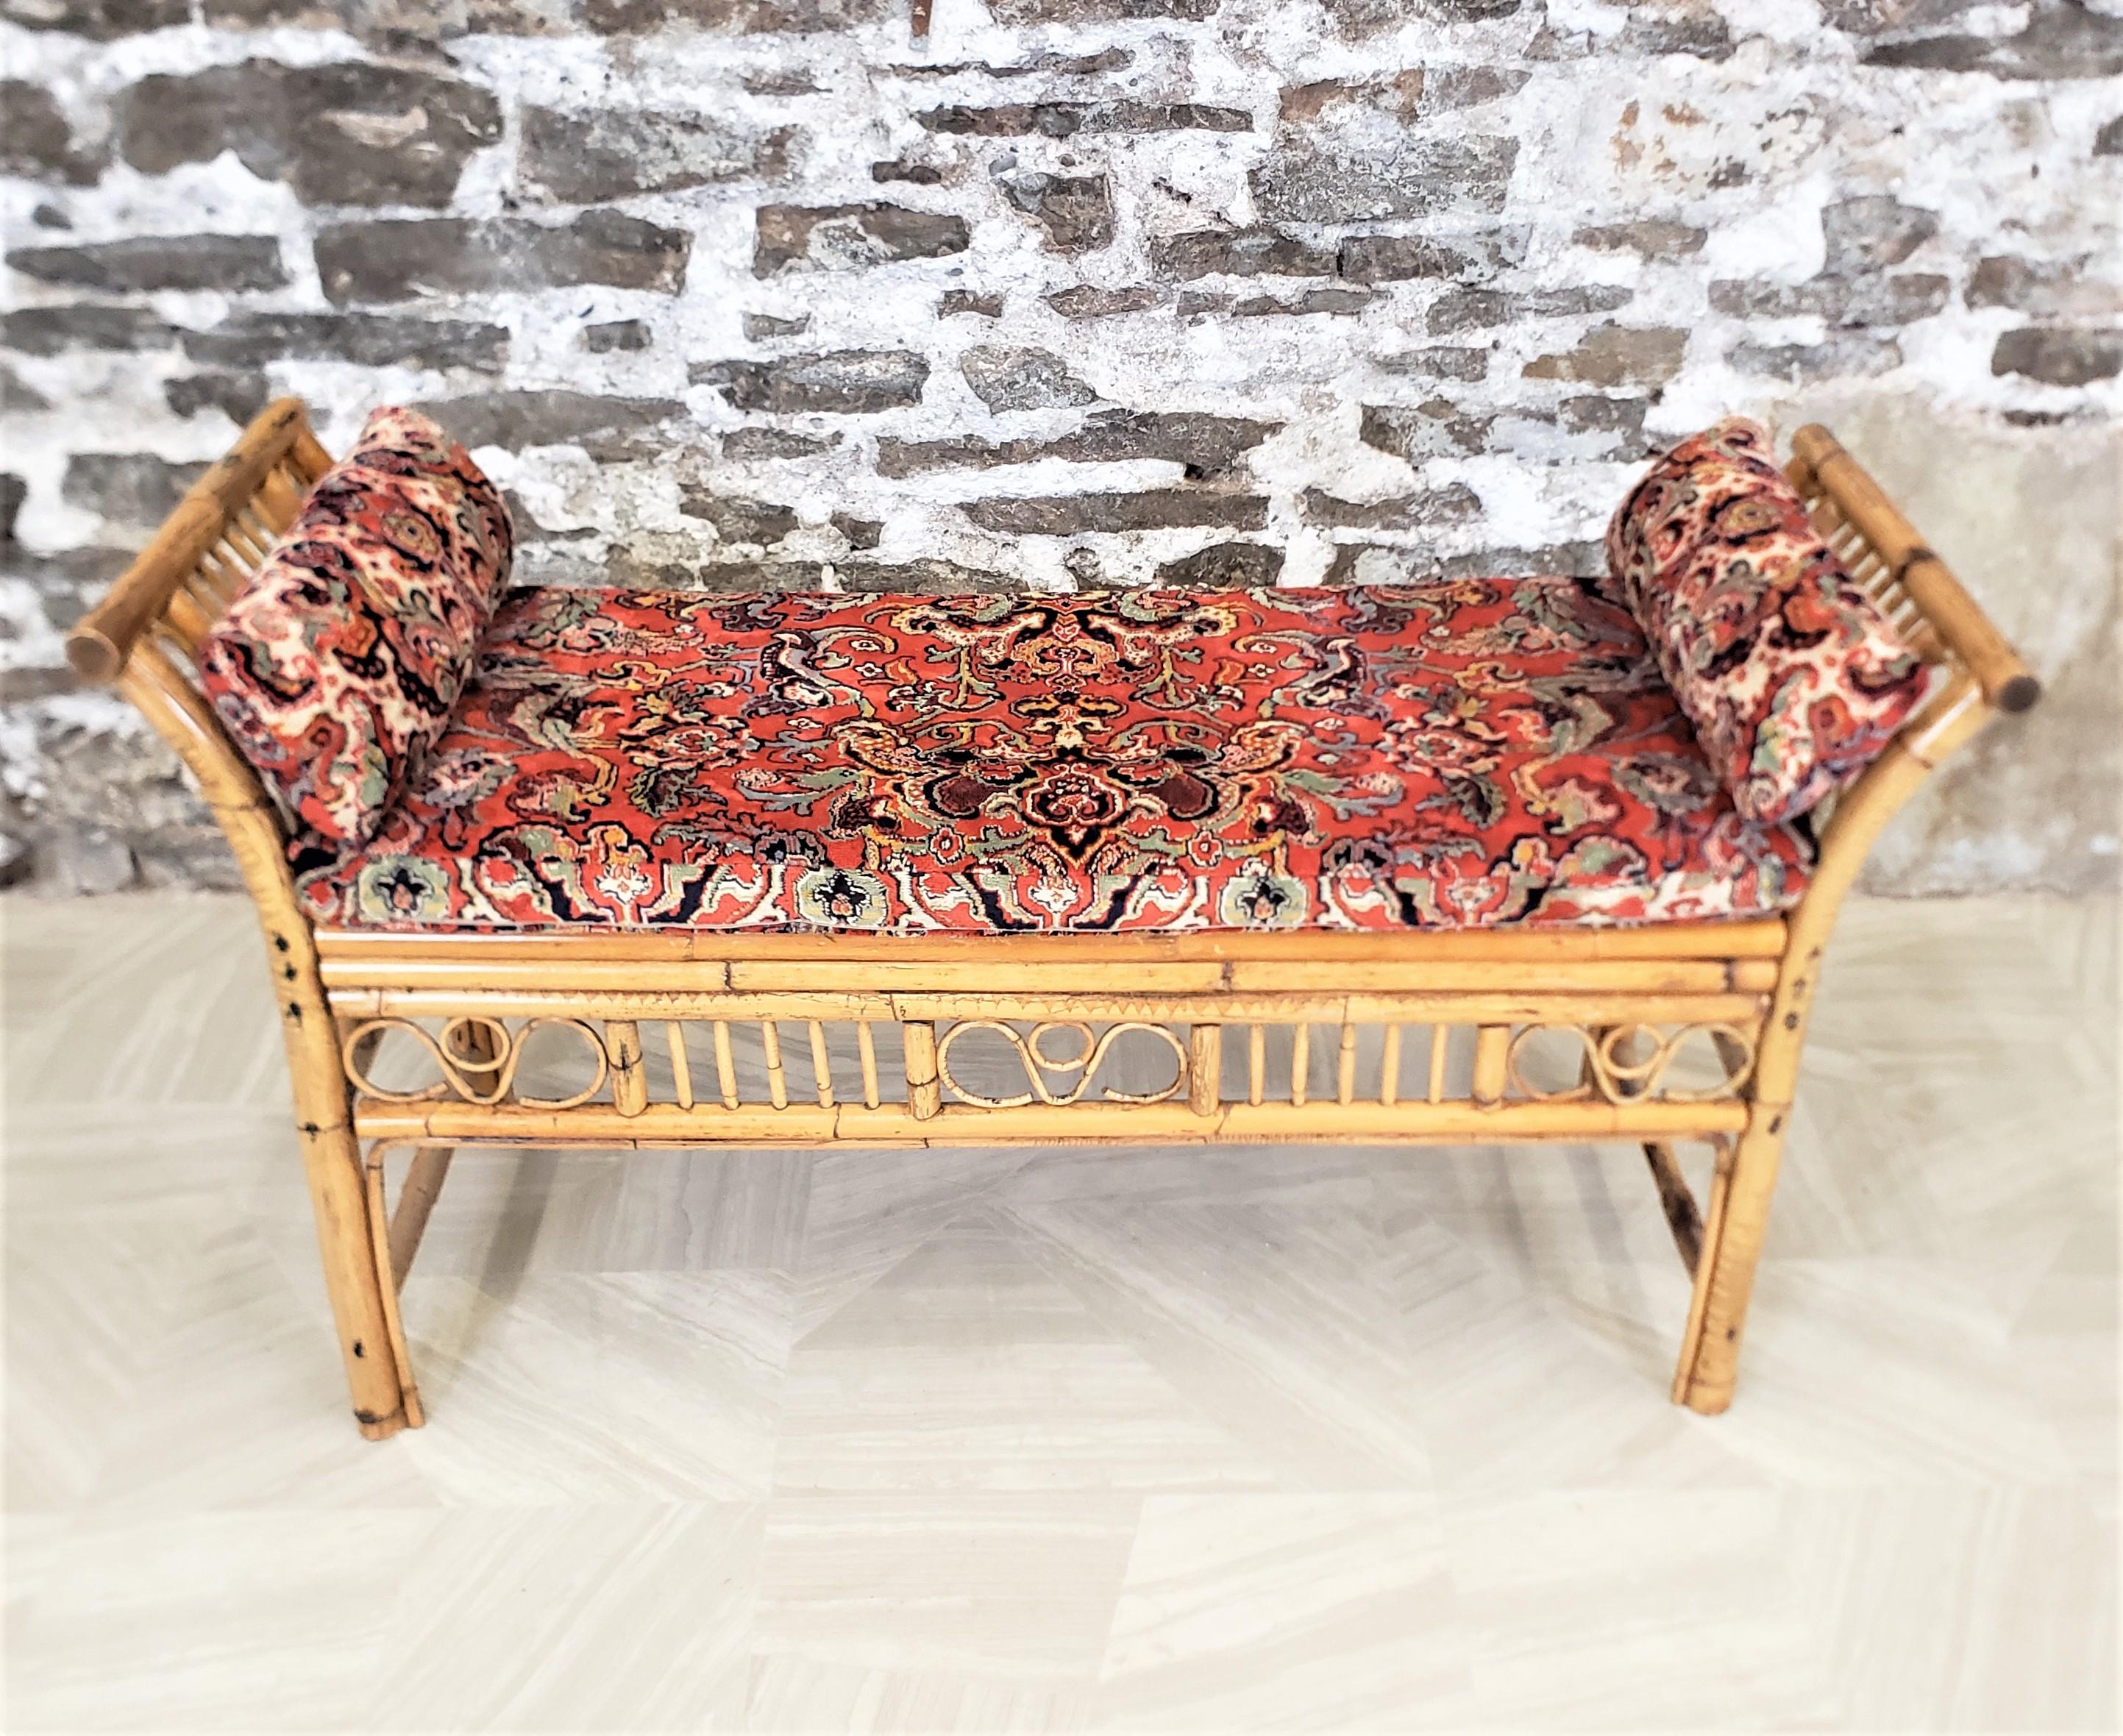 20th Century Antique Art Deco Rattan Bohemian Styled Bench with Cushion & Bolsters For Sale